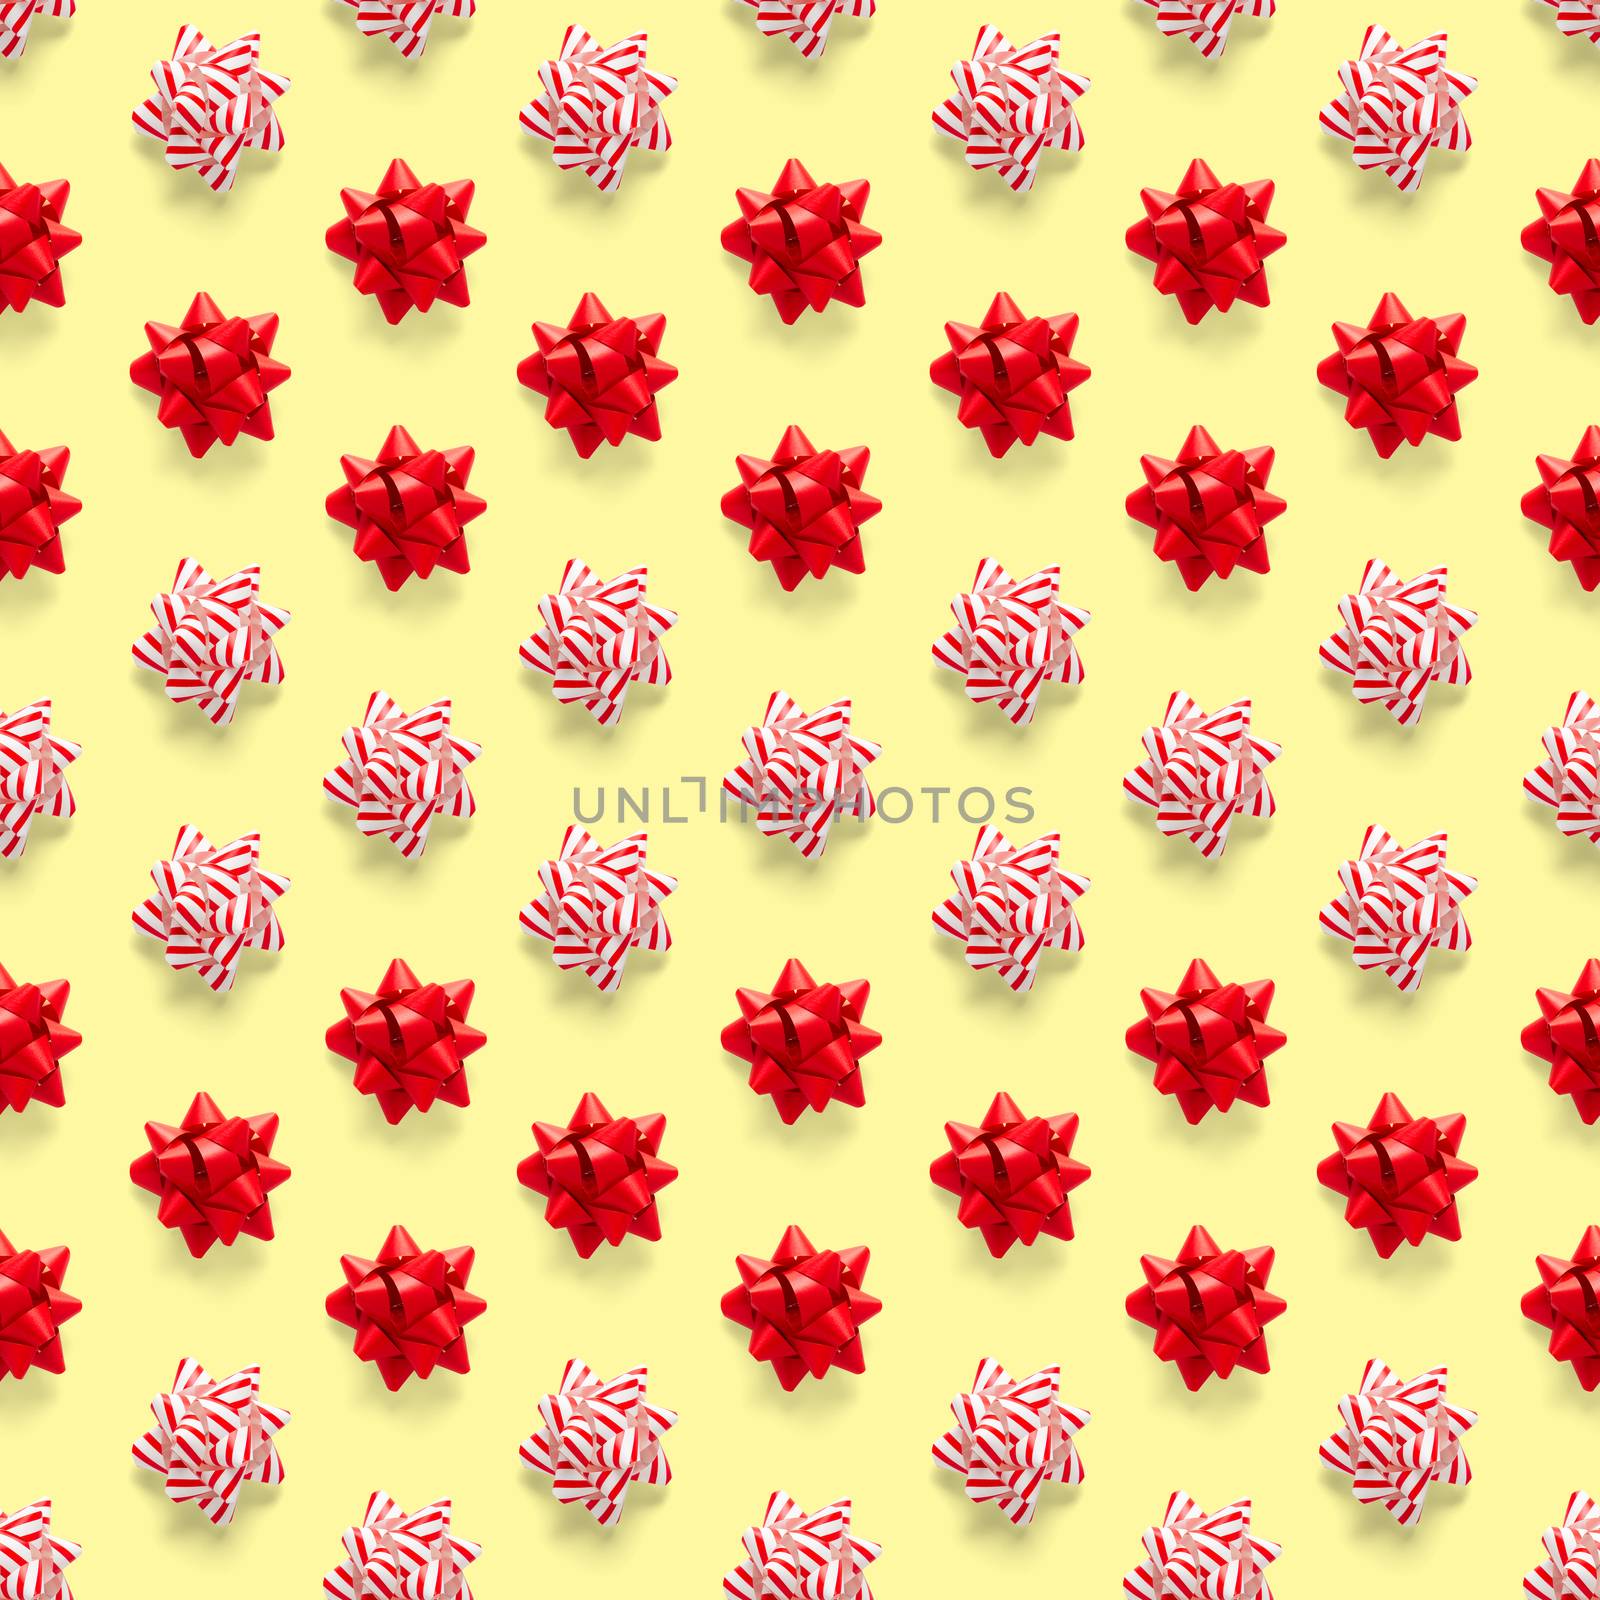 Seamless regular creative Christmas pattern with New Year decorations on yellow background. xmas Modern Seamless pattern made from christmas decorations. Photo quality pattern for fabric, prints, wallpapers, banners or creative design works.